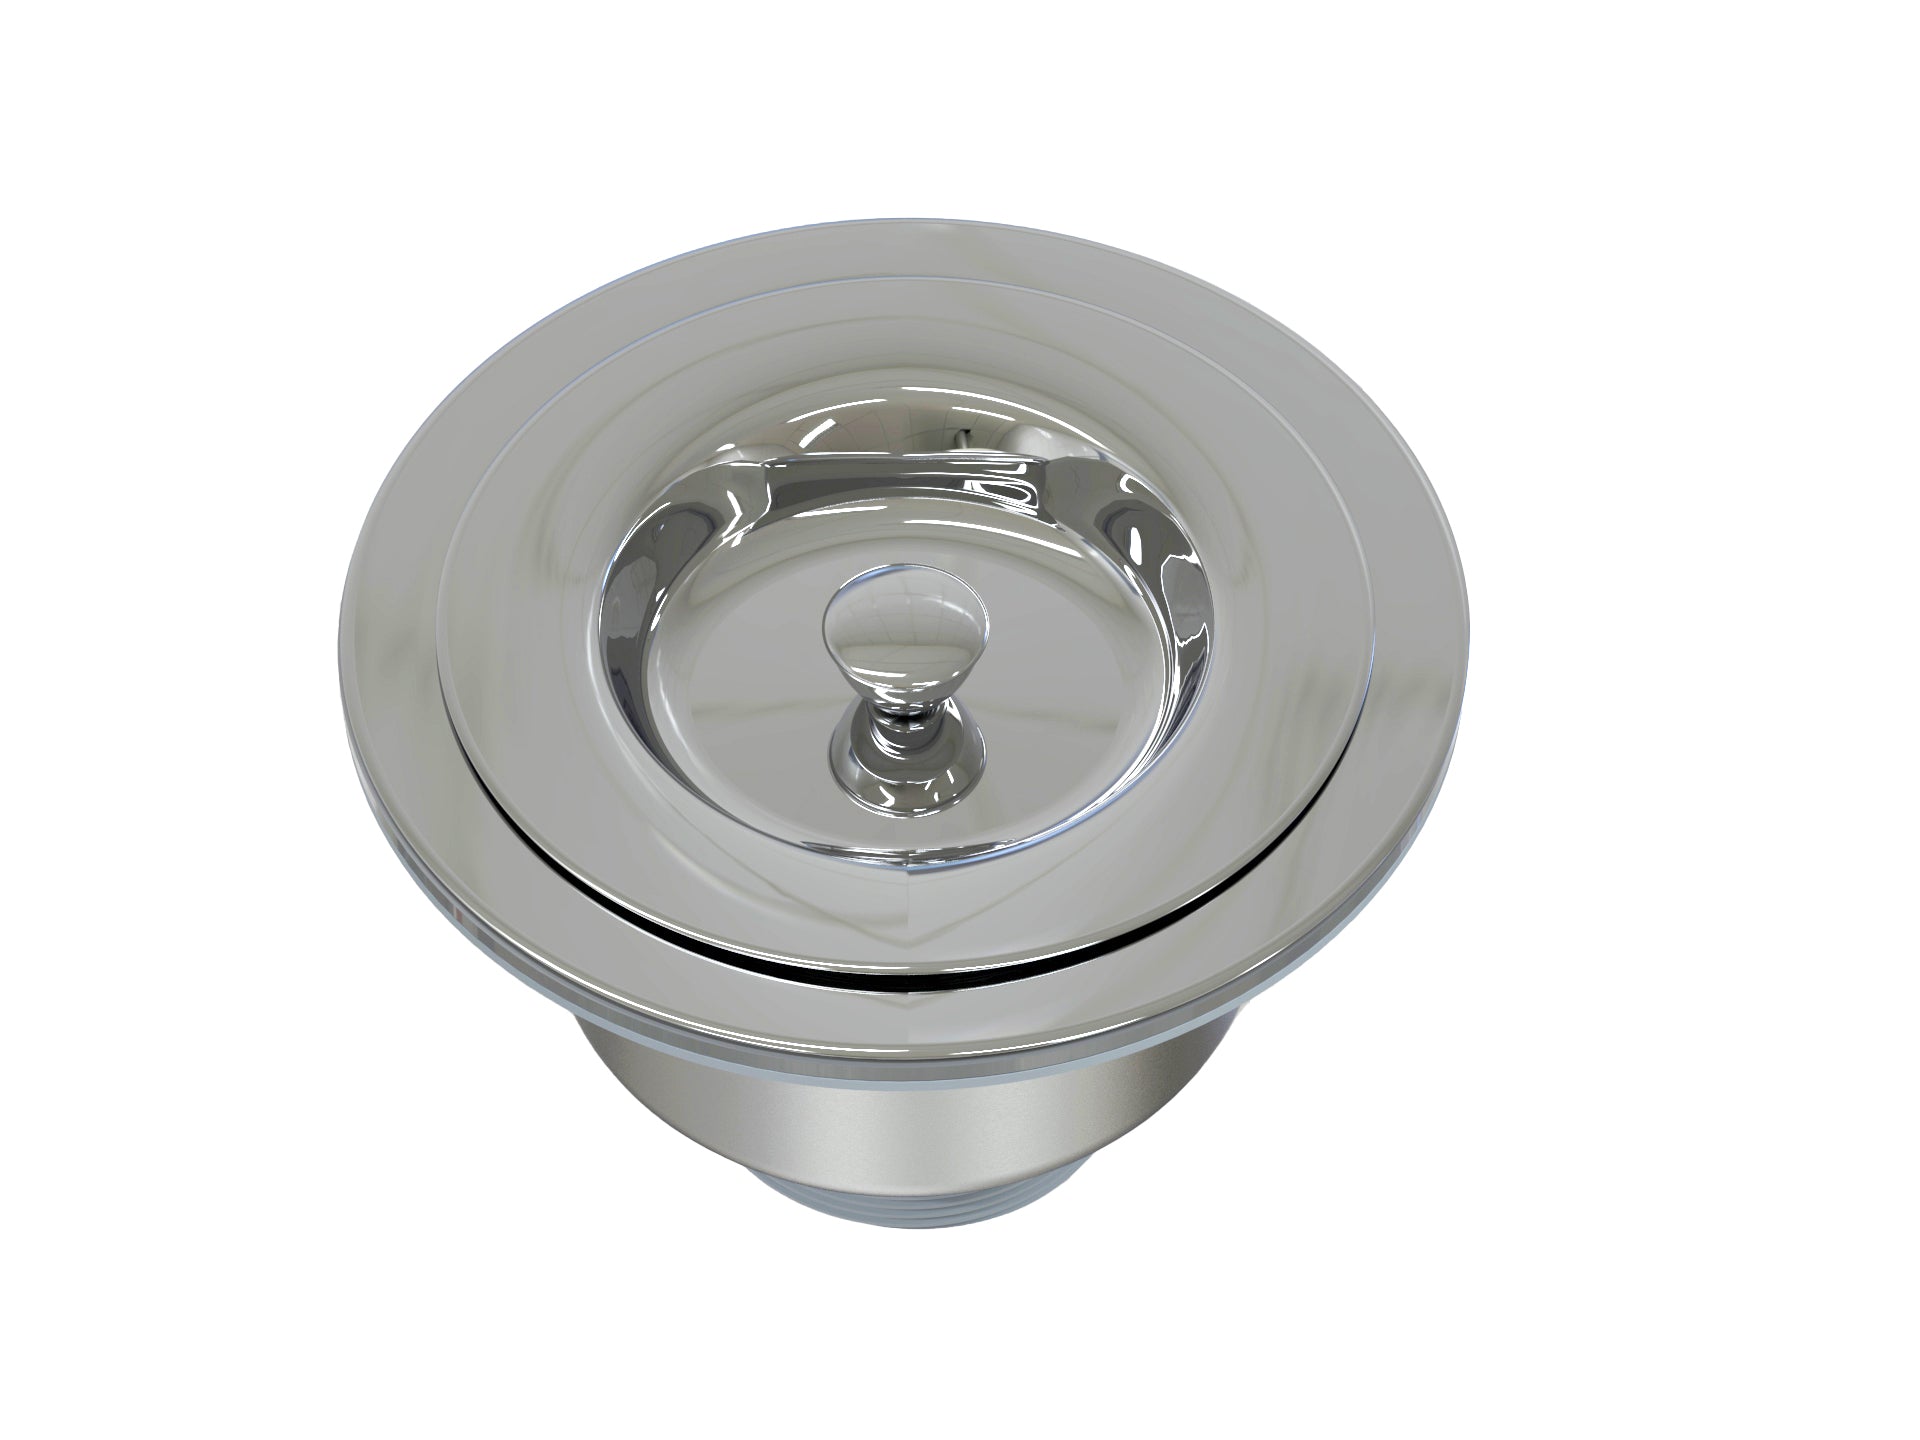 DAX Kitchen Basket Strainer, Stainless Steel Body, Chrome Finish, 4-1/2 x 4 Inches (DR-303A)